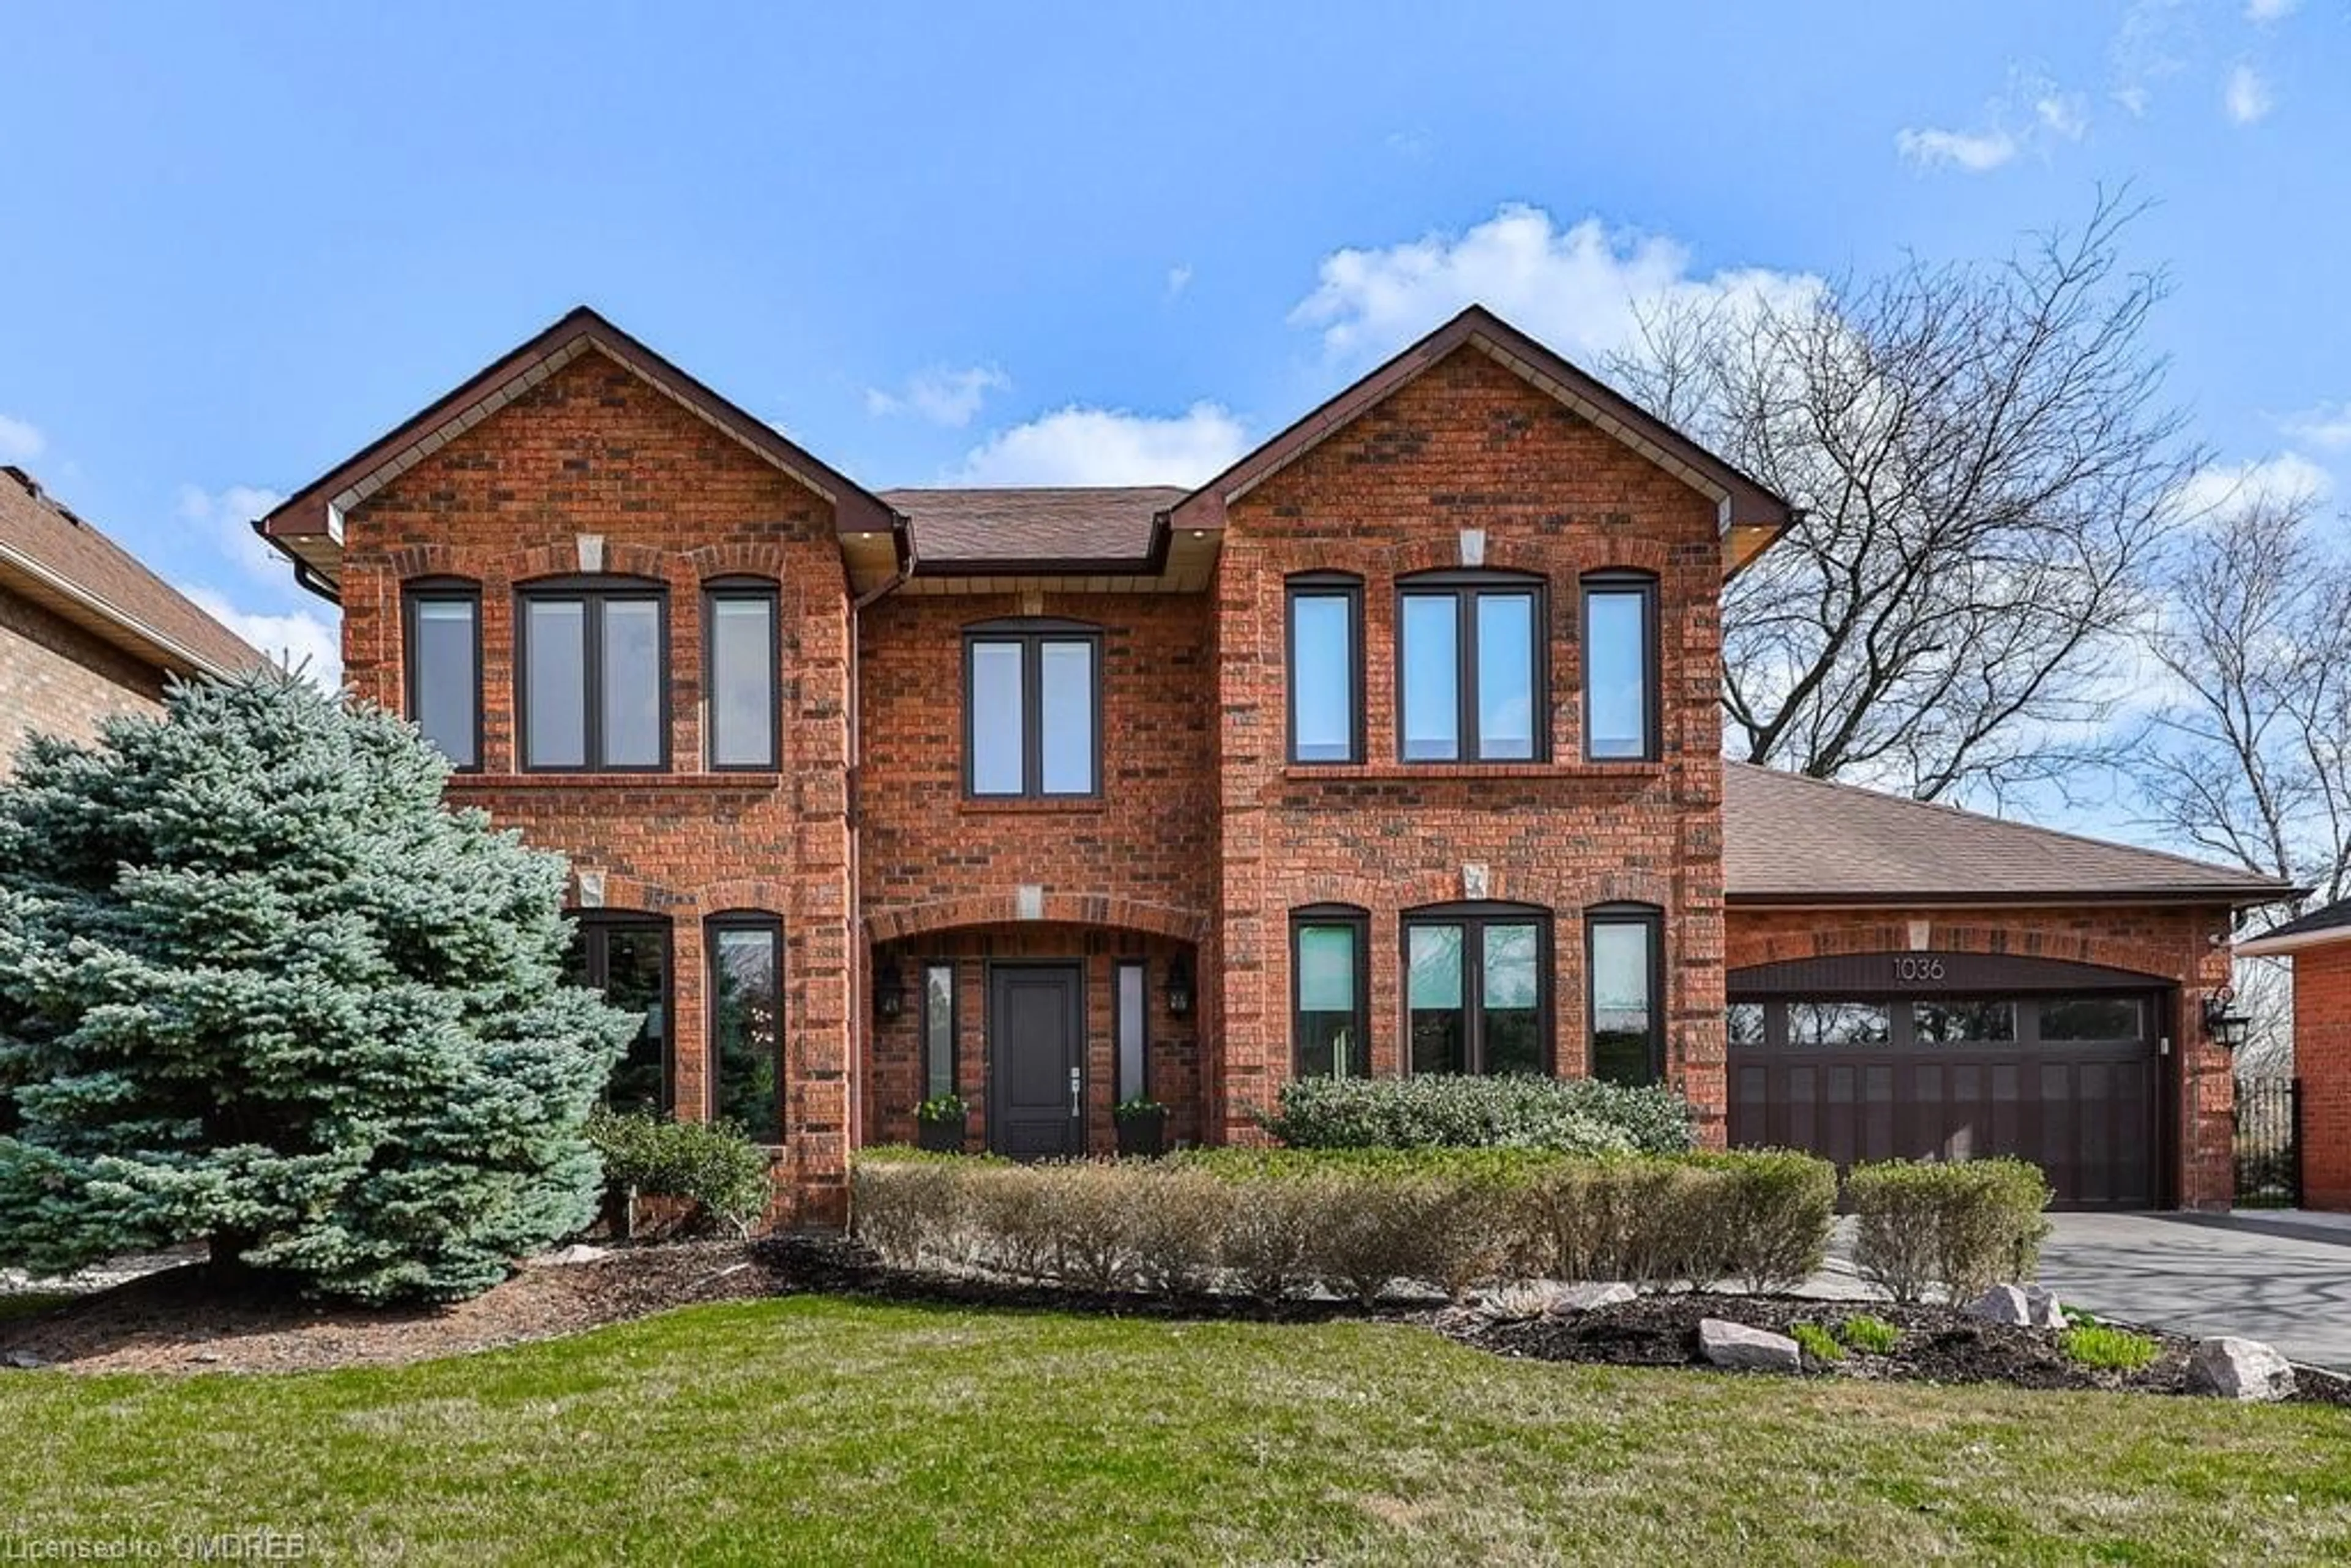 Home with brick exterior material for 1036 Masters Green, Oakville Ontario L6M 2N7